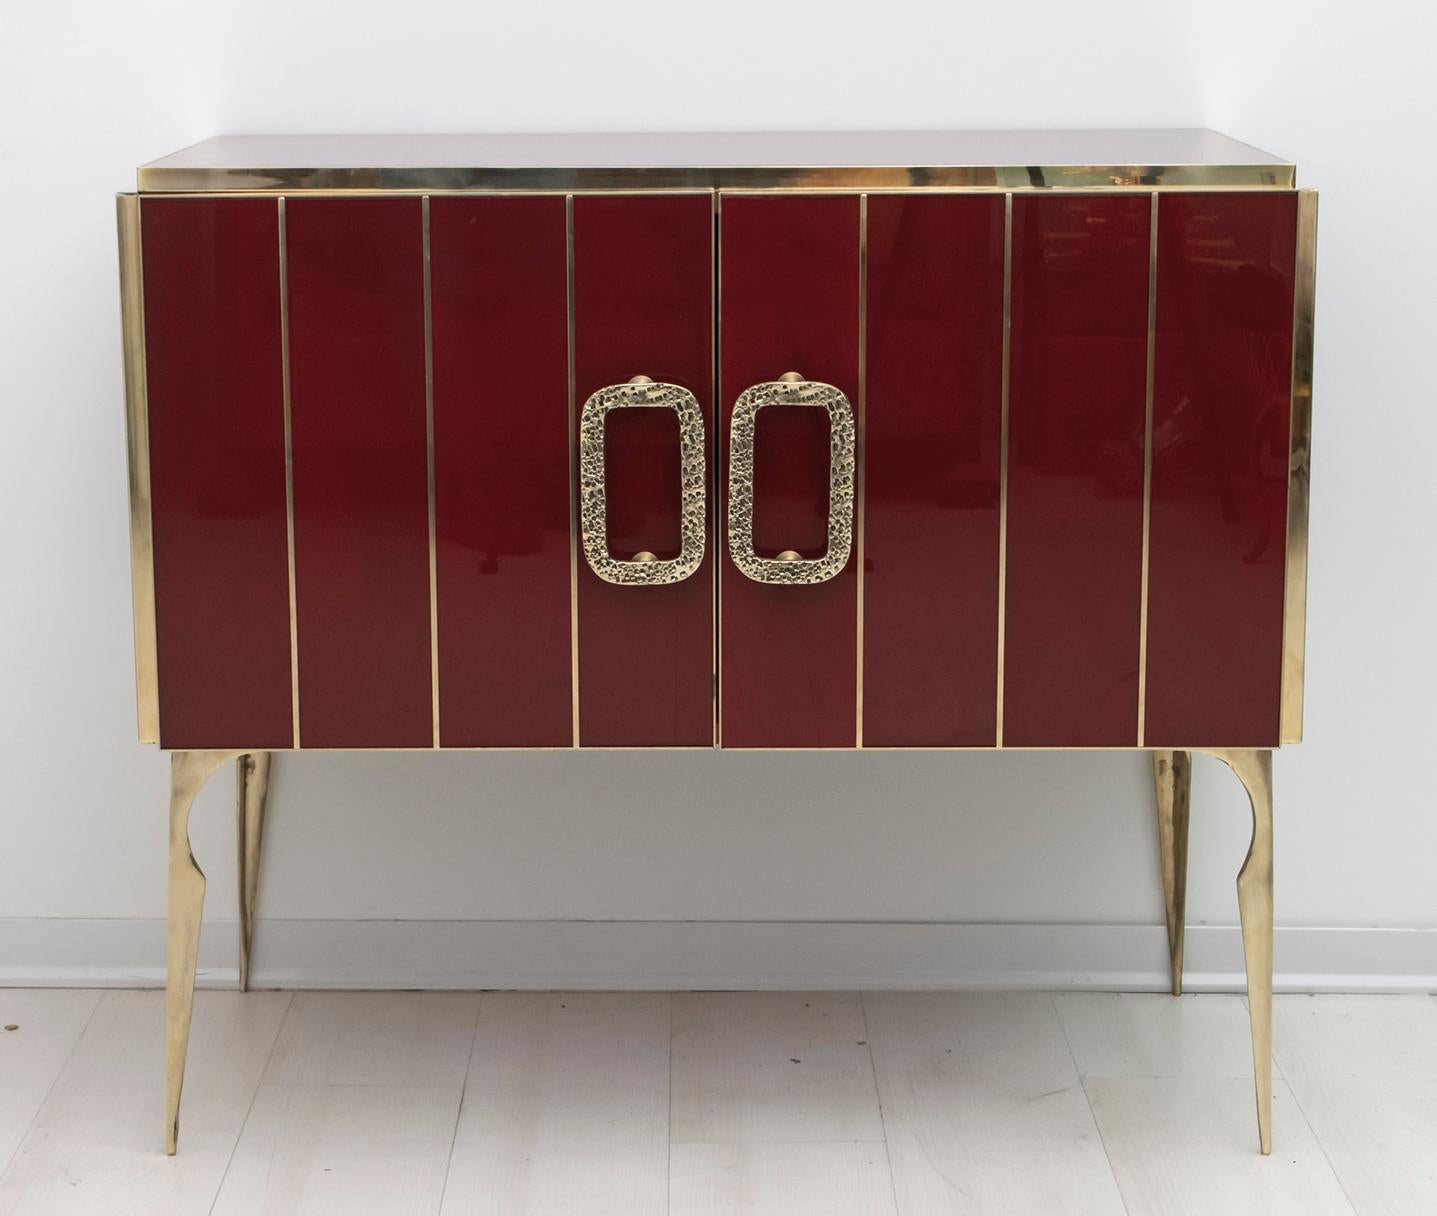 Beautiful Italian sideboard or bar cabinet made of burgundy red glass and brass, wooden structure.